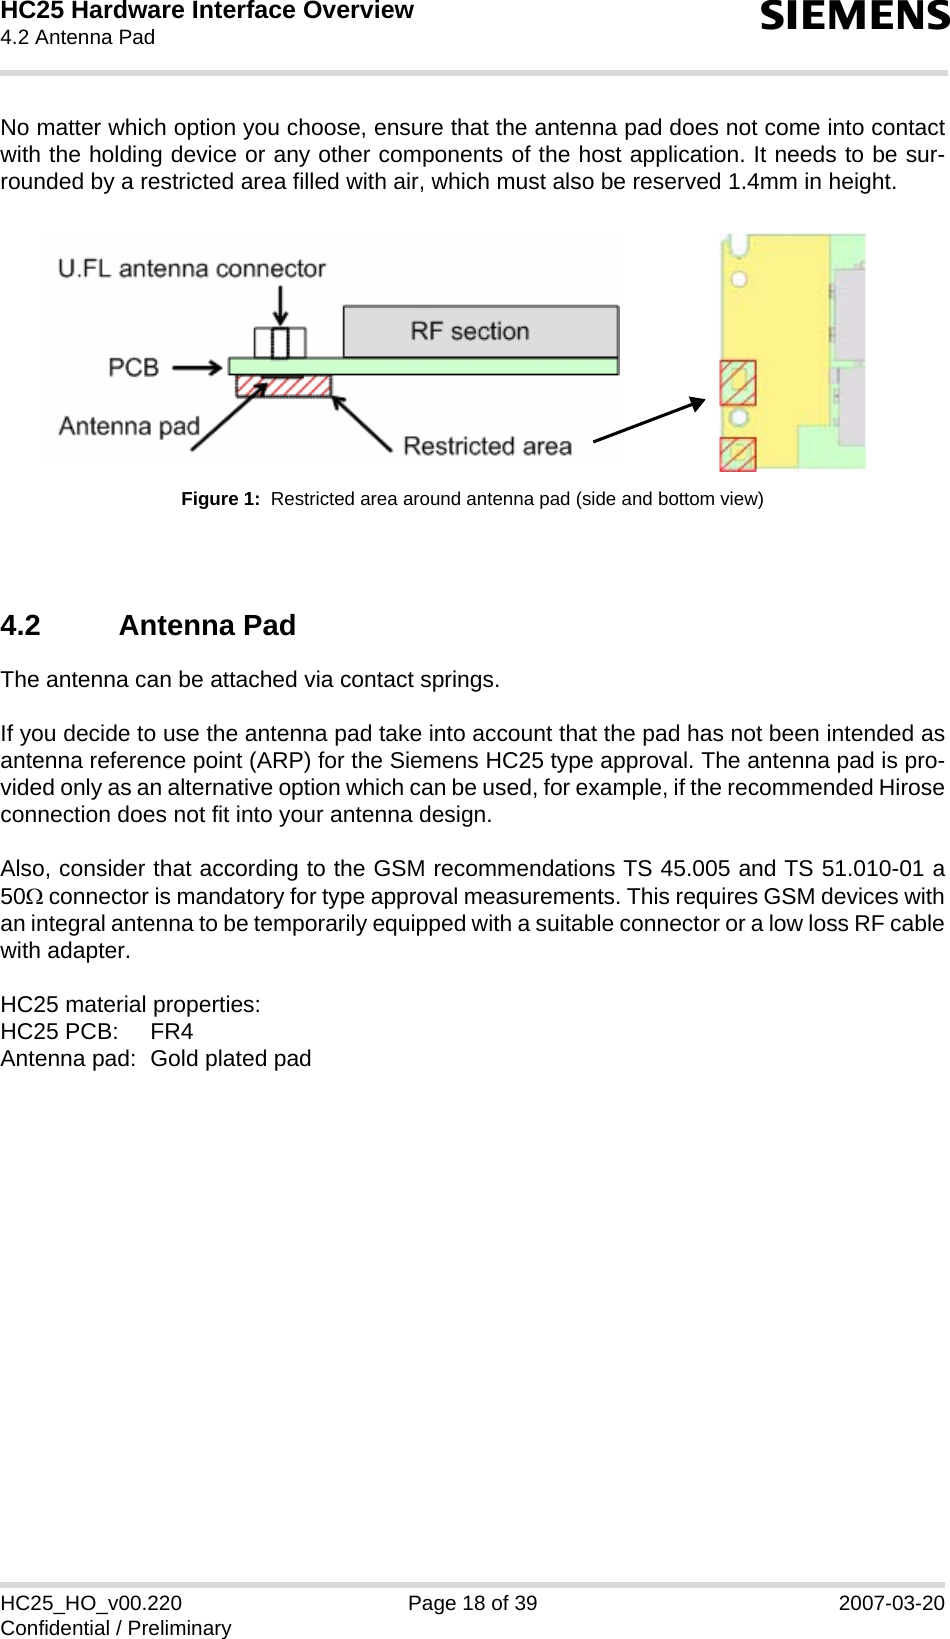 HC25 Hardware Interface Overview4.2 Antenna Pad22sHC25_HO_v00.220 Page 18 of 39 2007-03-20Confidential / PreliminaryNo matter which option you choose, ensure that the antenna pad does not come into contactwith the holding device or any other components of the host application. It needs to be sur-rounded by a restricted area filled with air, which must also be reserved 1.4mm in height.Figure 1:  Restricted area around antenna pad (side and bottom view)4.2 Antenna PadThe antenna can be attached via contact springs.If you decide to use the antenna pad take into account that the pad has not been intended asantenna reference point (ARP) for the Siemens HC25 type approval. The antenna pad is pro-vided only as an alternative option which can be used, for example, if the recommended Hiroseconnection does not fit into your antenna design. Also, consider that according to the GSM recommendations TS 45.005 and TS 51.010-01 a50Ω connector is mandatory for type approval measurements. This requires GSM devices withan integral antenna to be temporarily equipped with a suitable connector or a low loss RF cablewith adapter. HC25 material properties:HC25 PCB:  FR4Antenna pad:  Gold plated pad